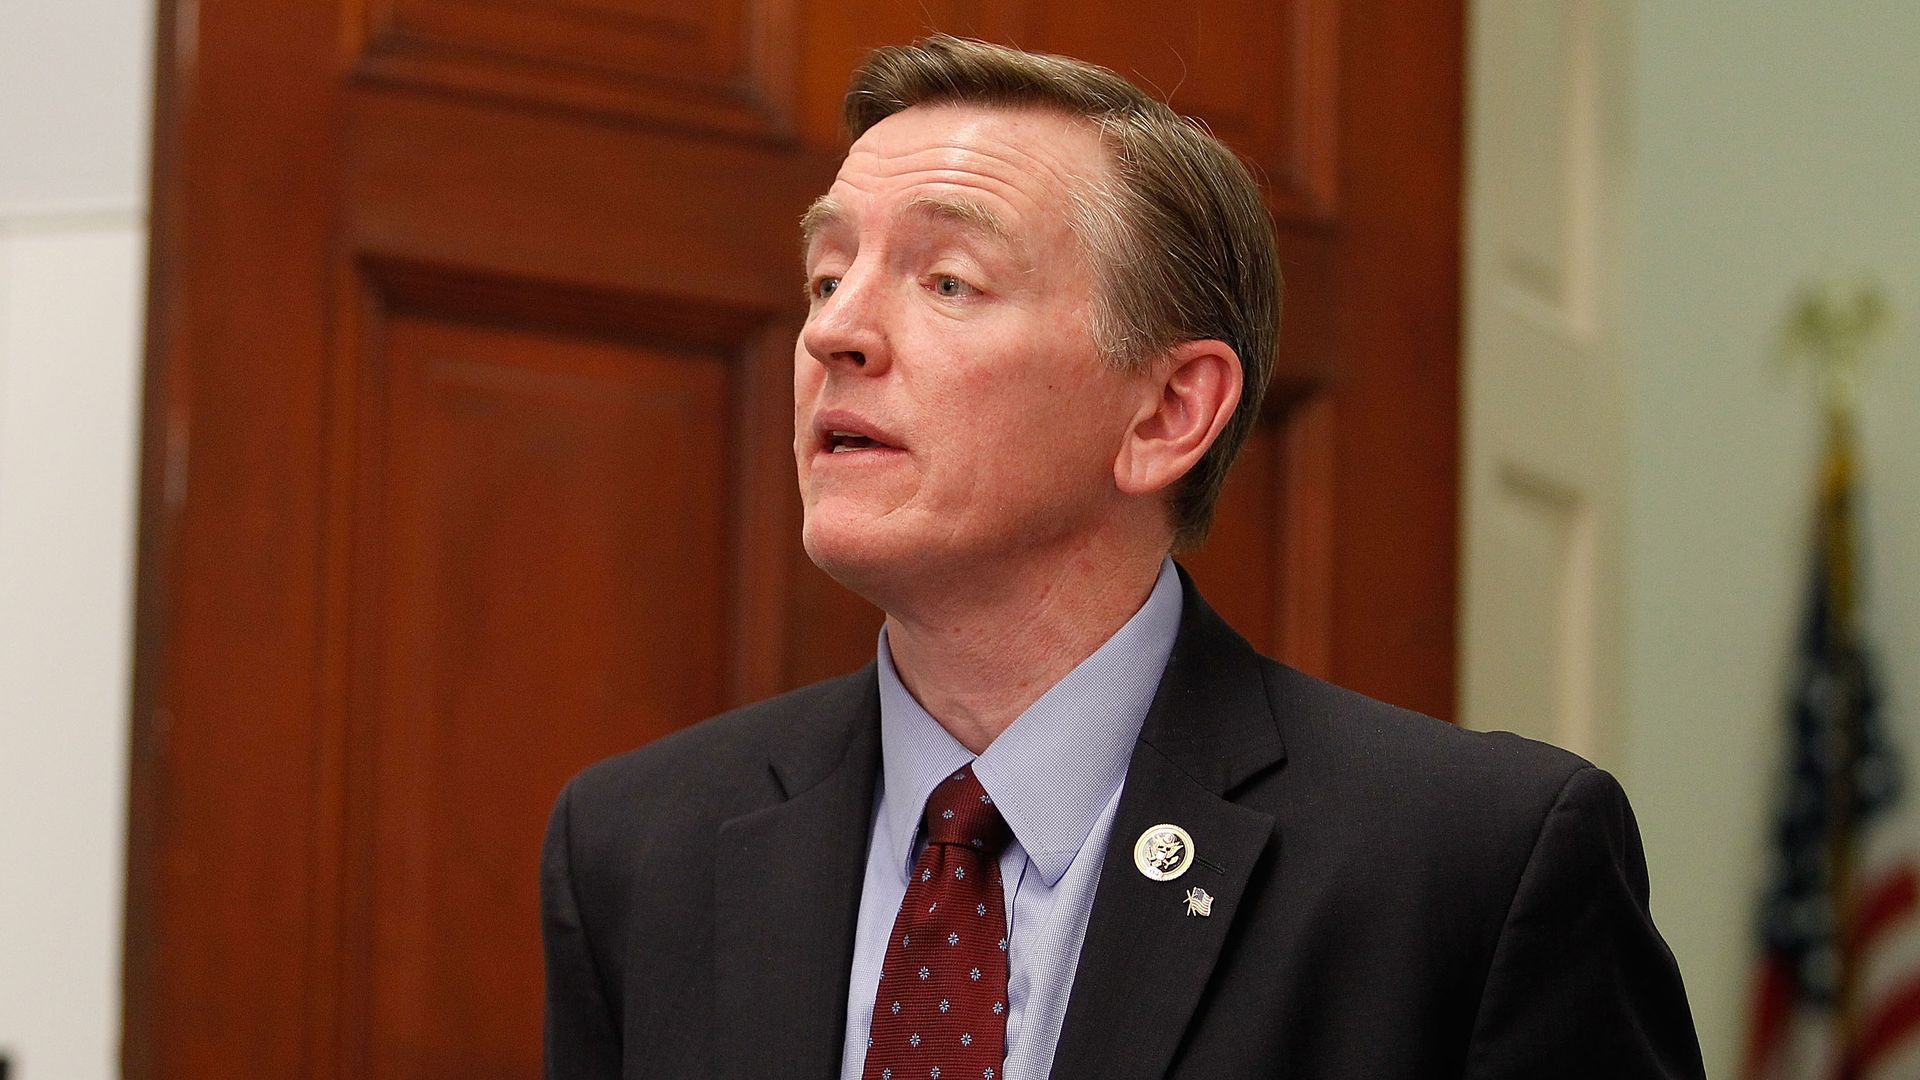 Rep. Paul Gosar is seen speaking during a news conference.